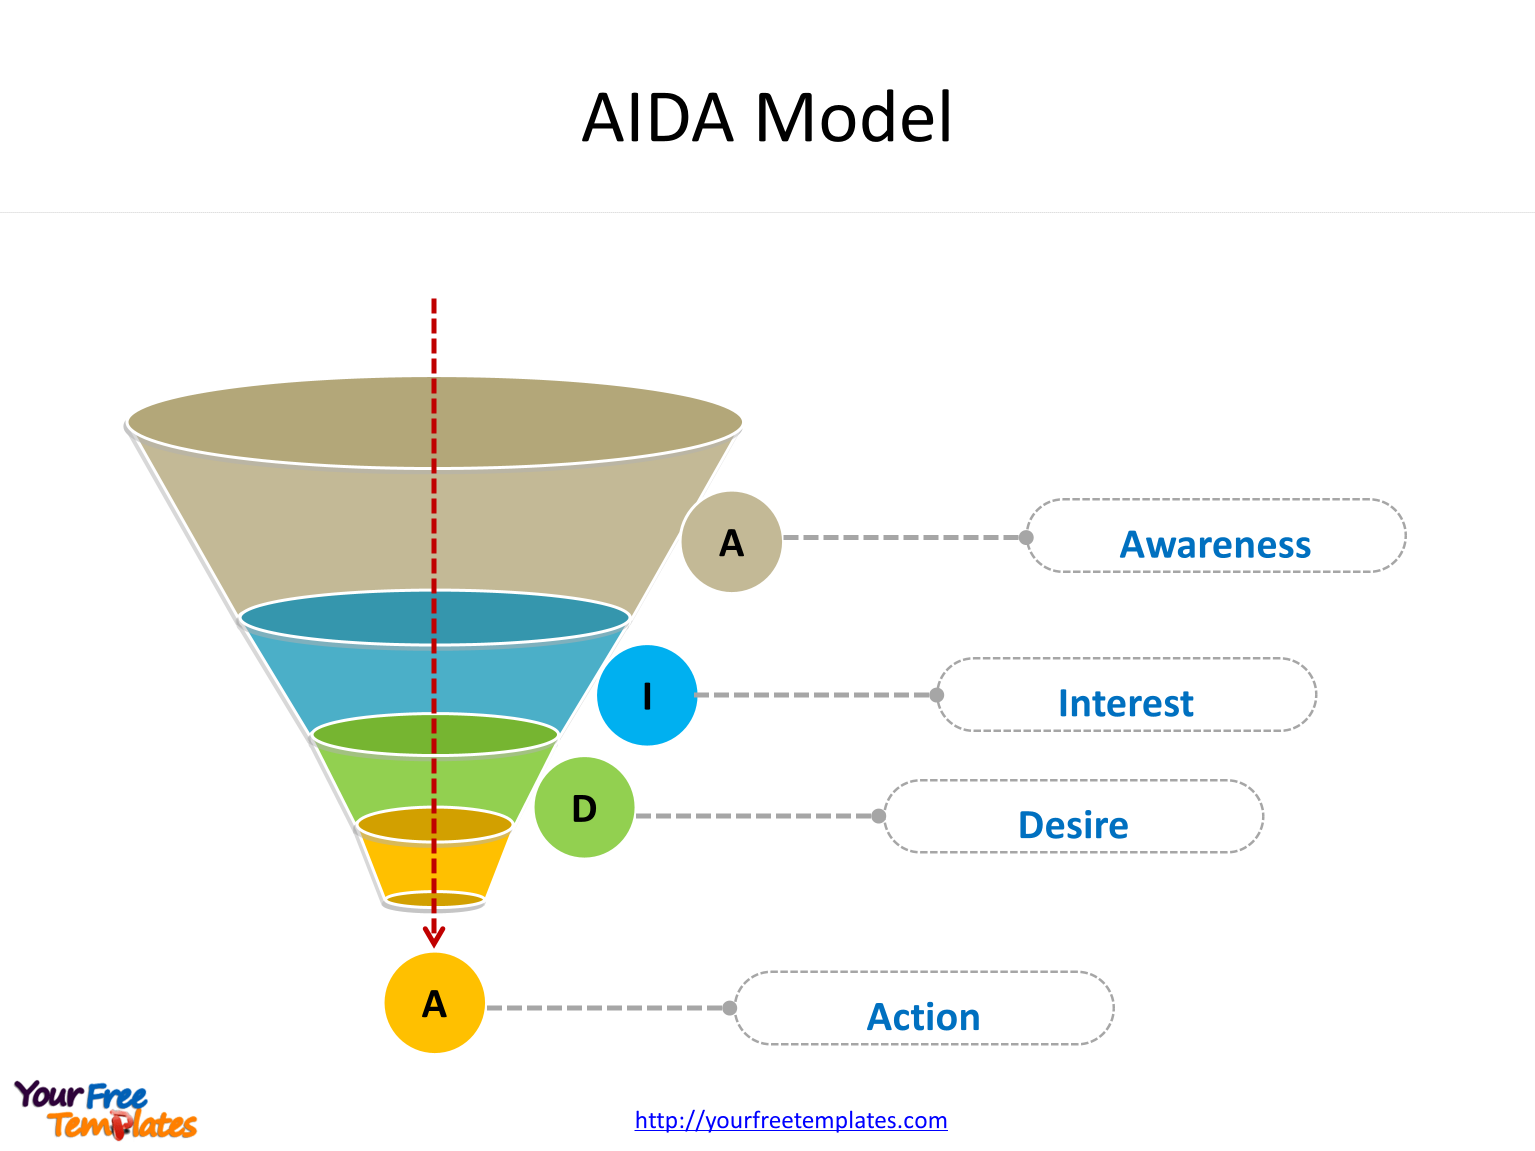 AIDA marketing diagram of Attention, Interest, Desire and Action